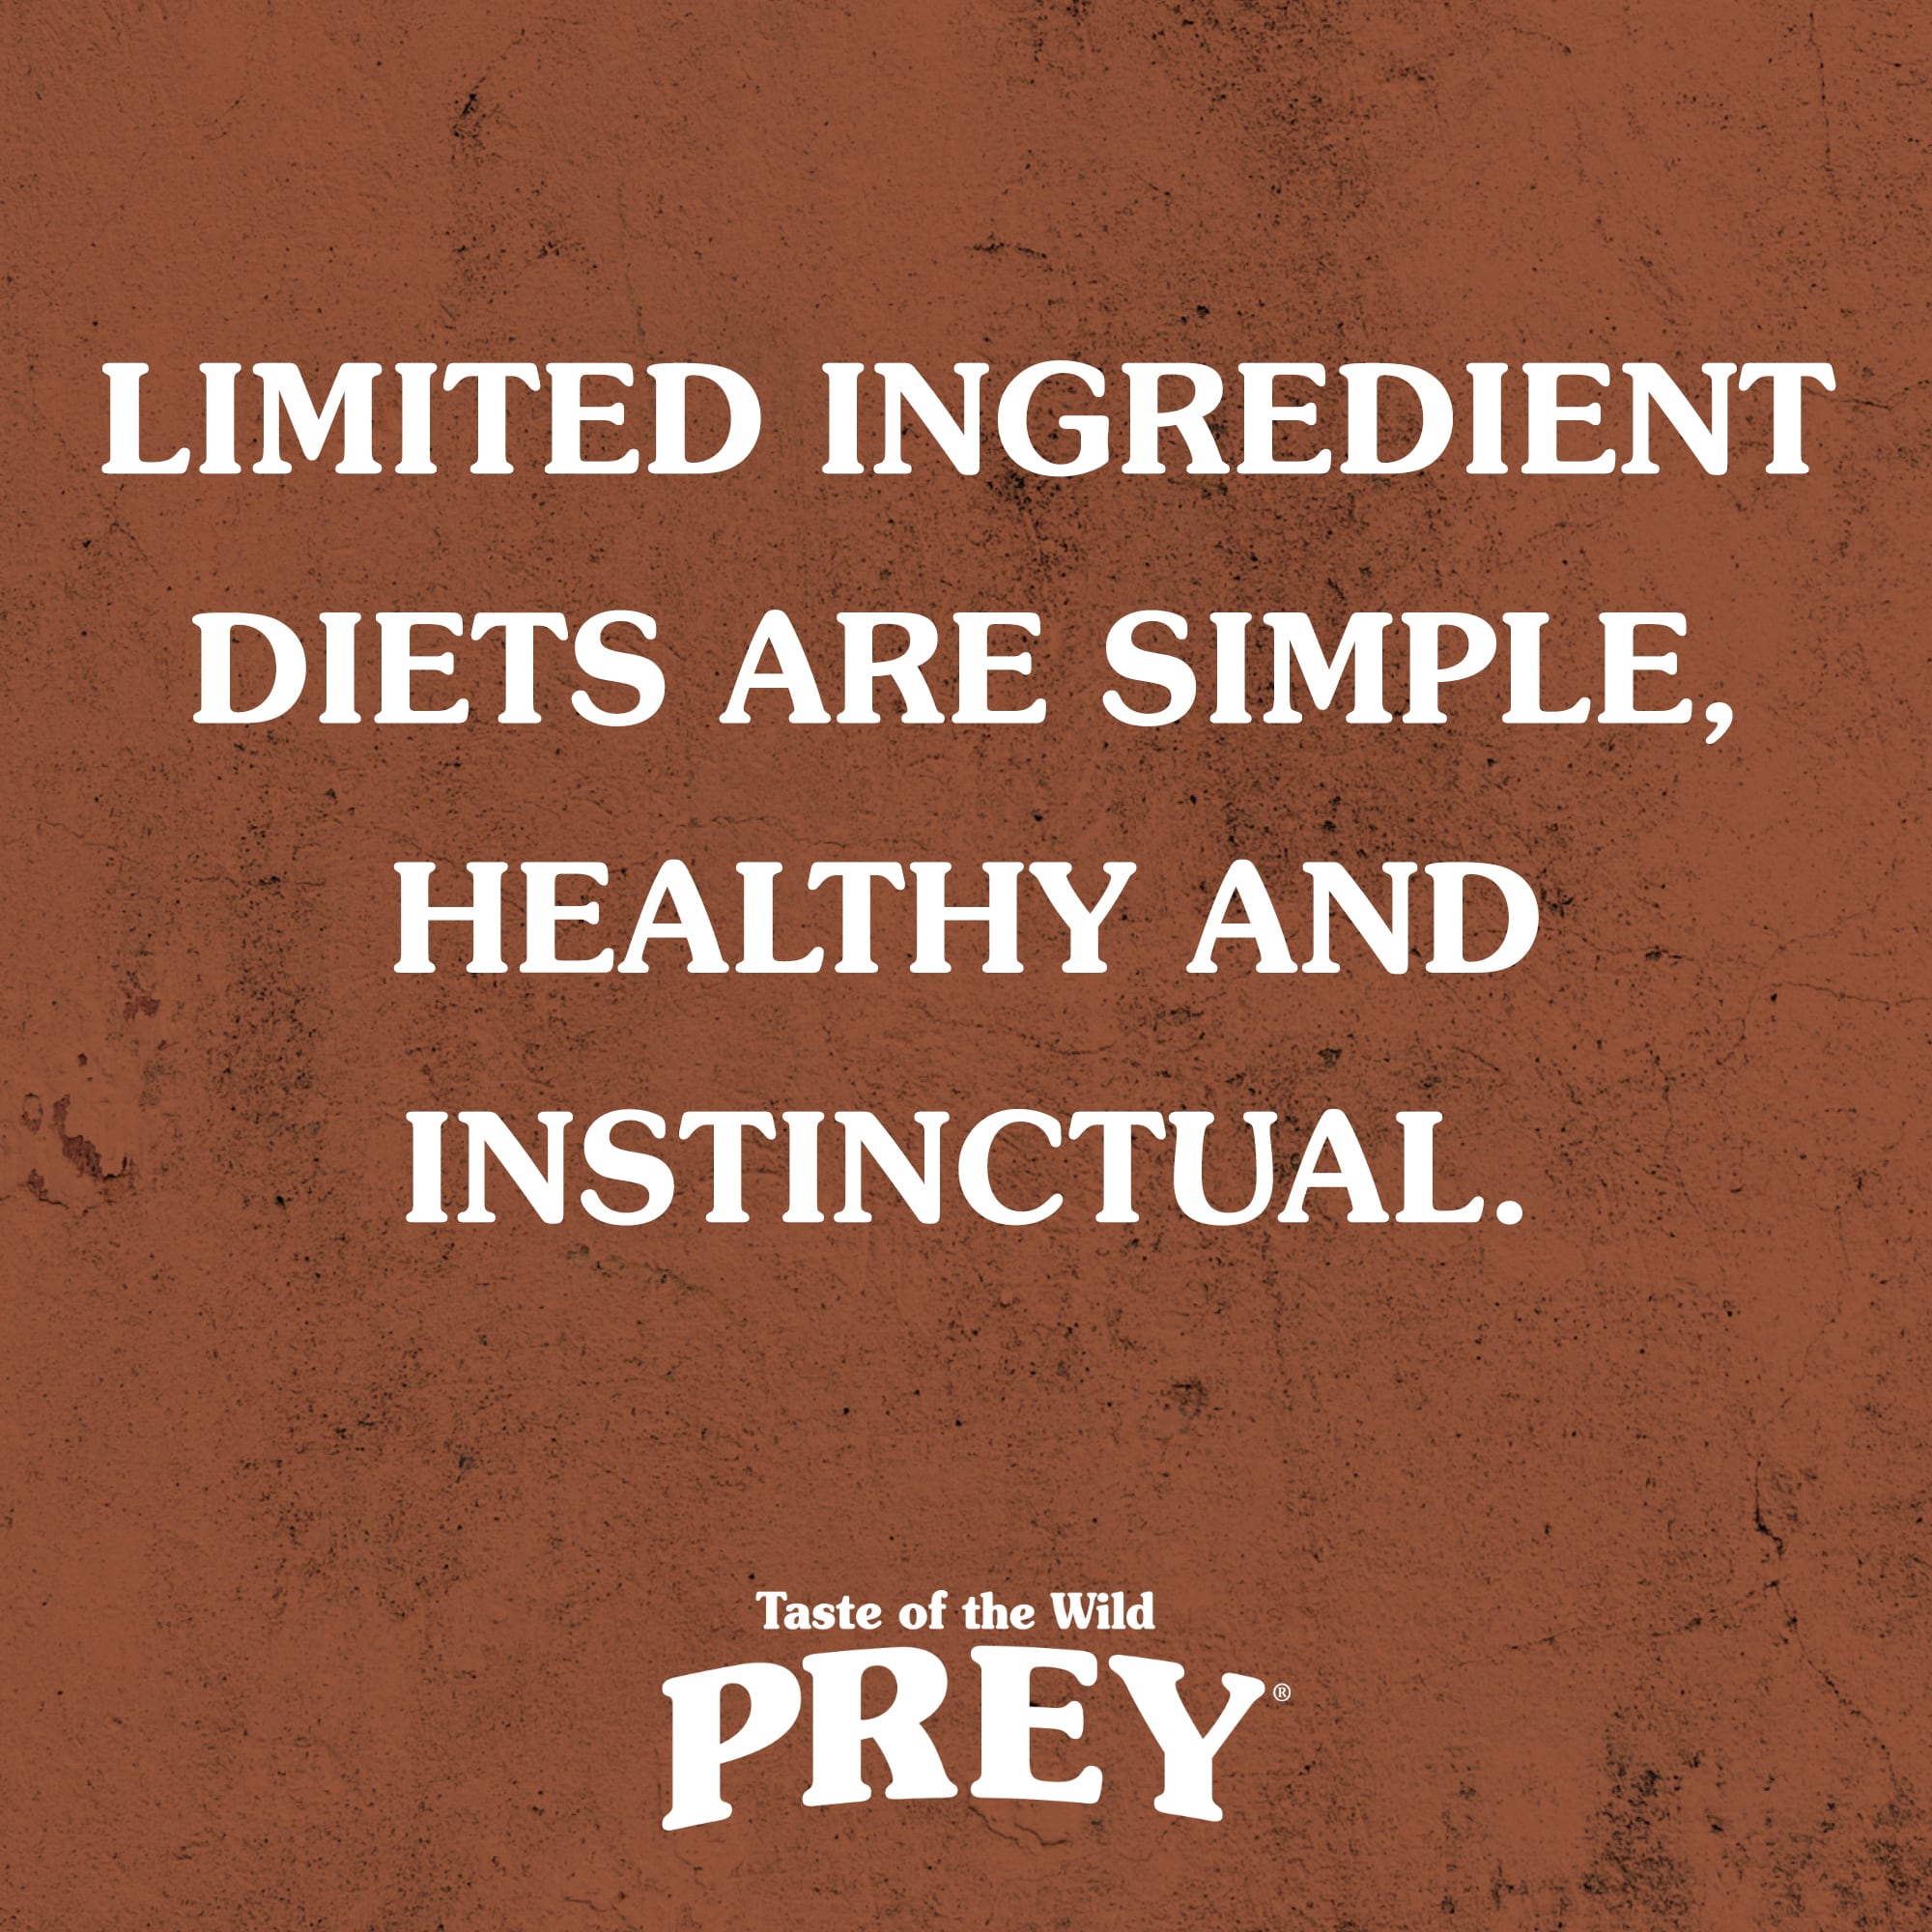 A graphic stating 'Limited Ingredient Diets Are Simple, Healthy and Instinctual'.